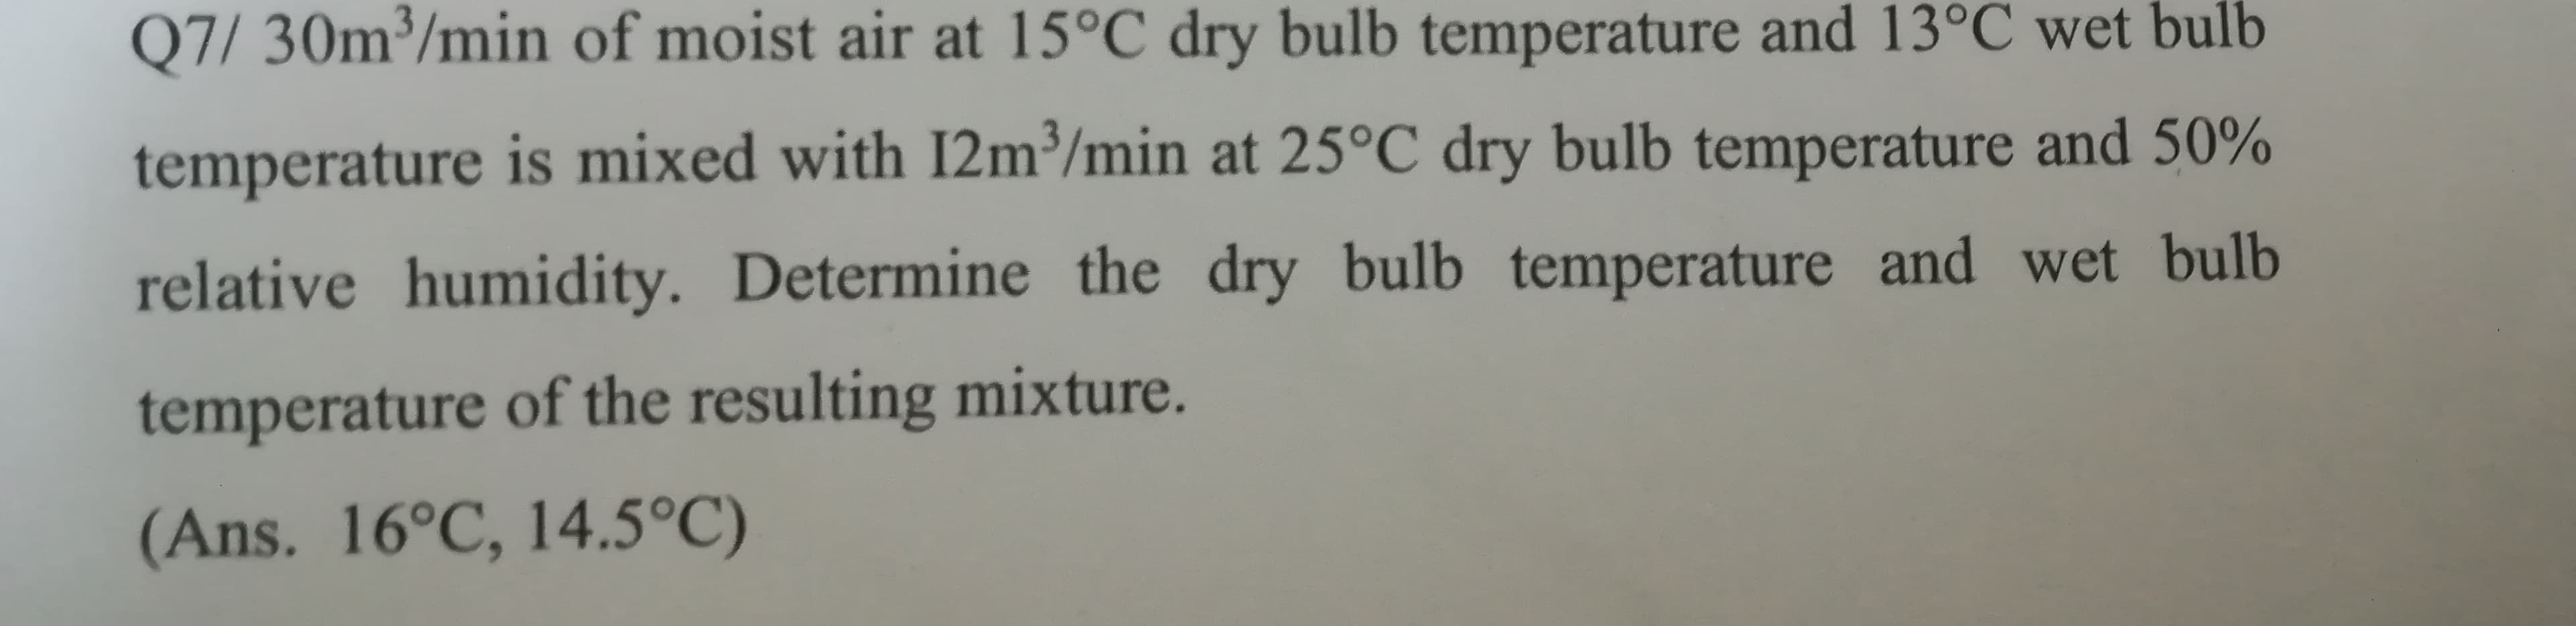 Q7/ 30m³/min of moist air at 15°C dry bulb temperature and 13°C wet bulb
temperature is mixed with I2m³/min at 25°C dry bulb temperature and 50%
relative humidity. Determine the dry bulb temperature and wet bulb
temperature of the resulting mixture.
(Ans. 16°C, 14.5°C)
